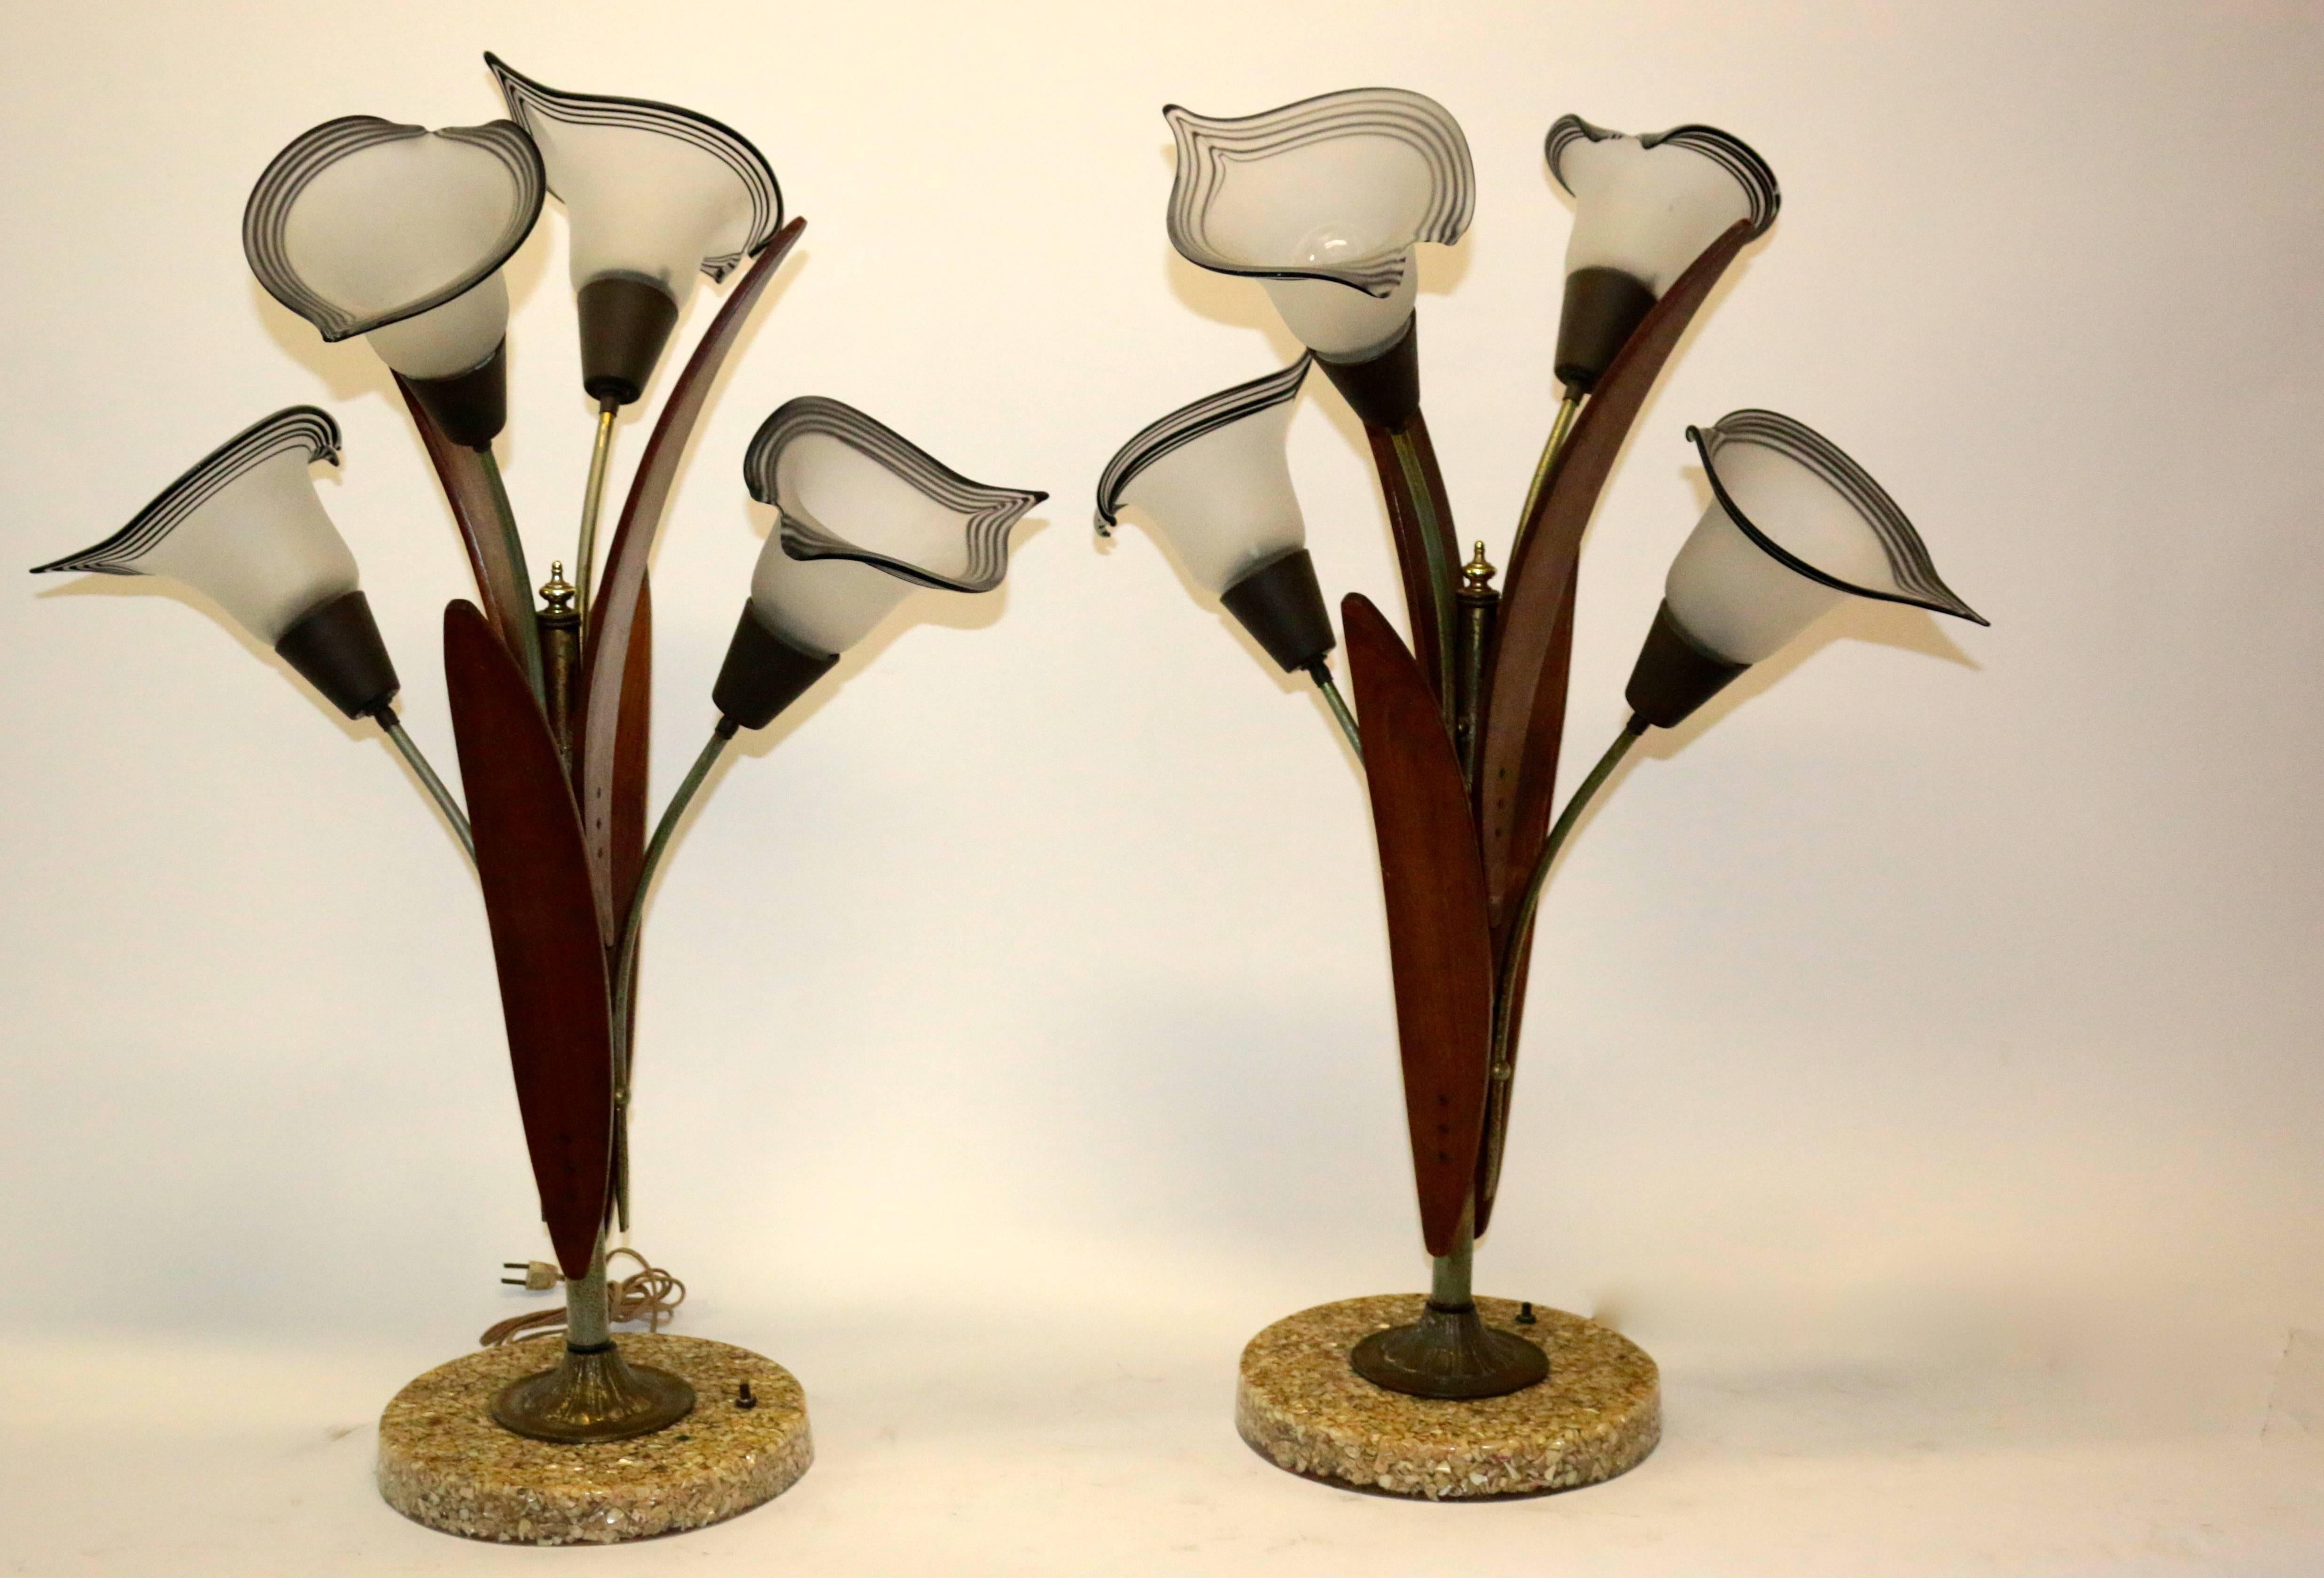 Pair of Mid-Century Teak Wood Table Lamps with Glass Shades 1